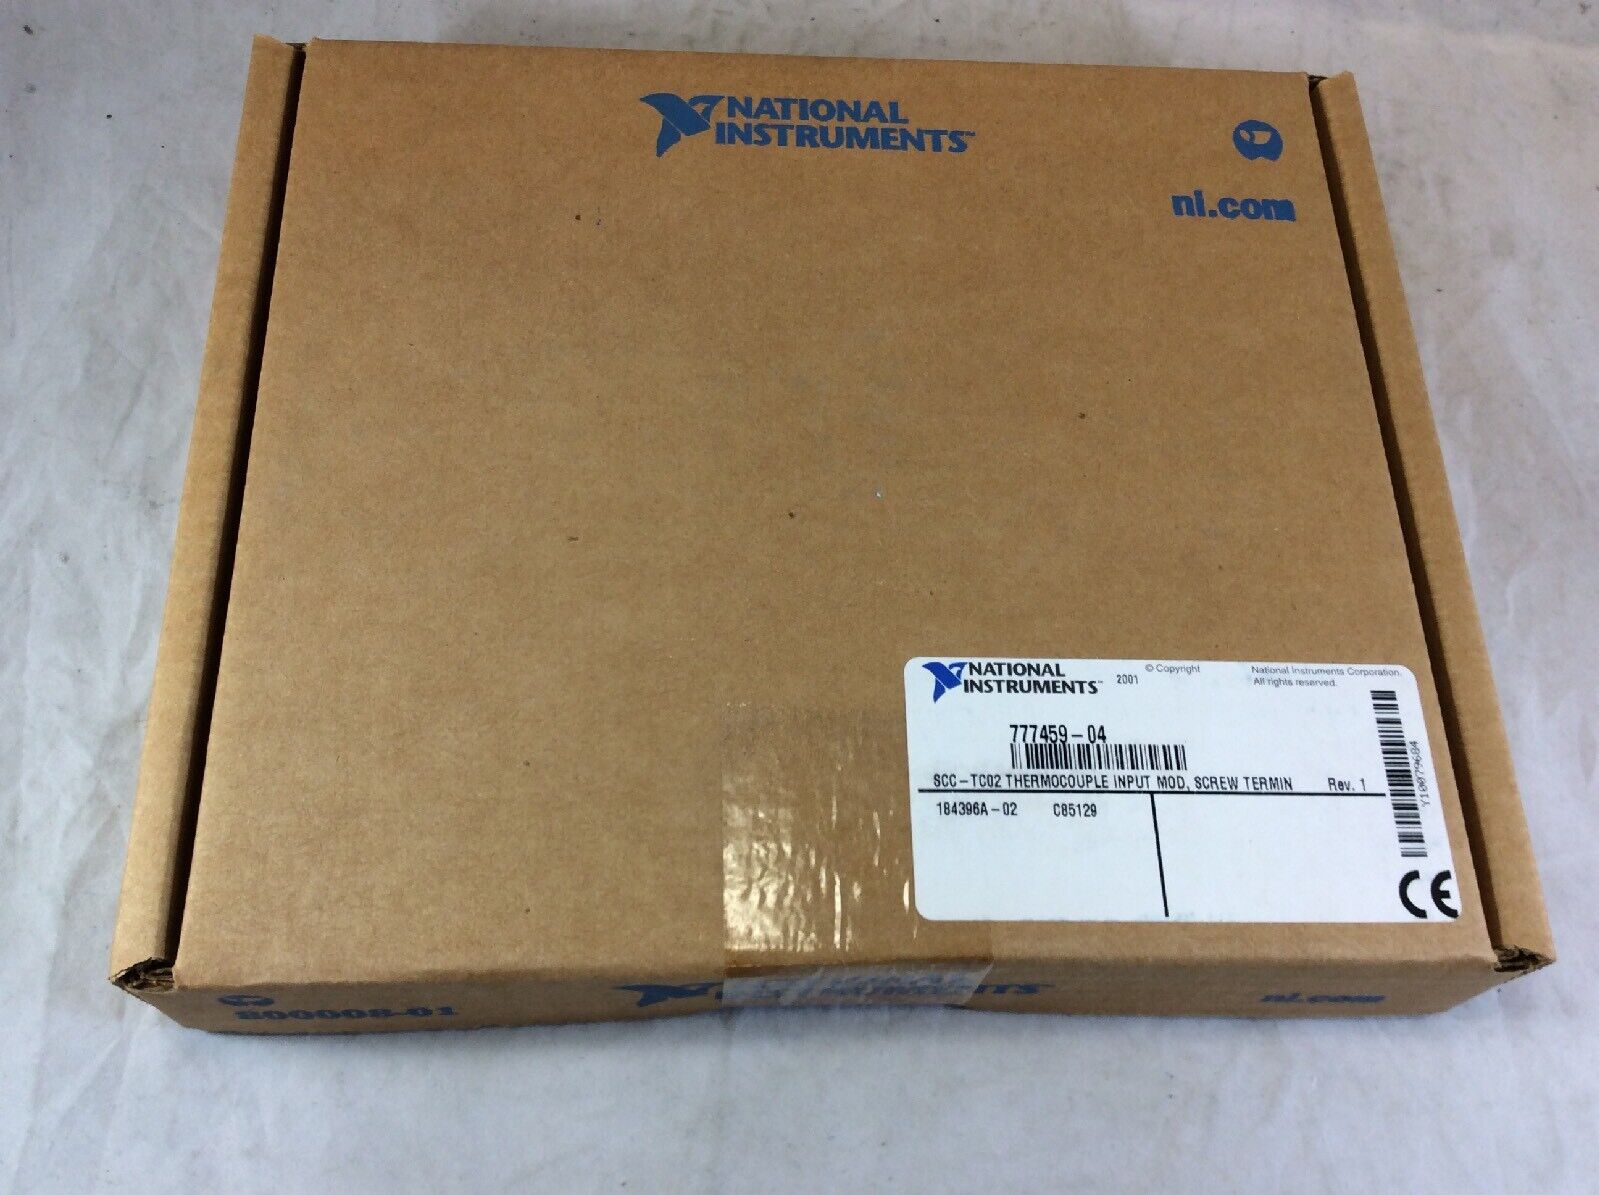 NEW IN BOX NI National Instruments SCC-TC02 Thermocouple Input module 777459-04